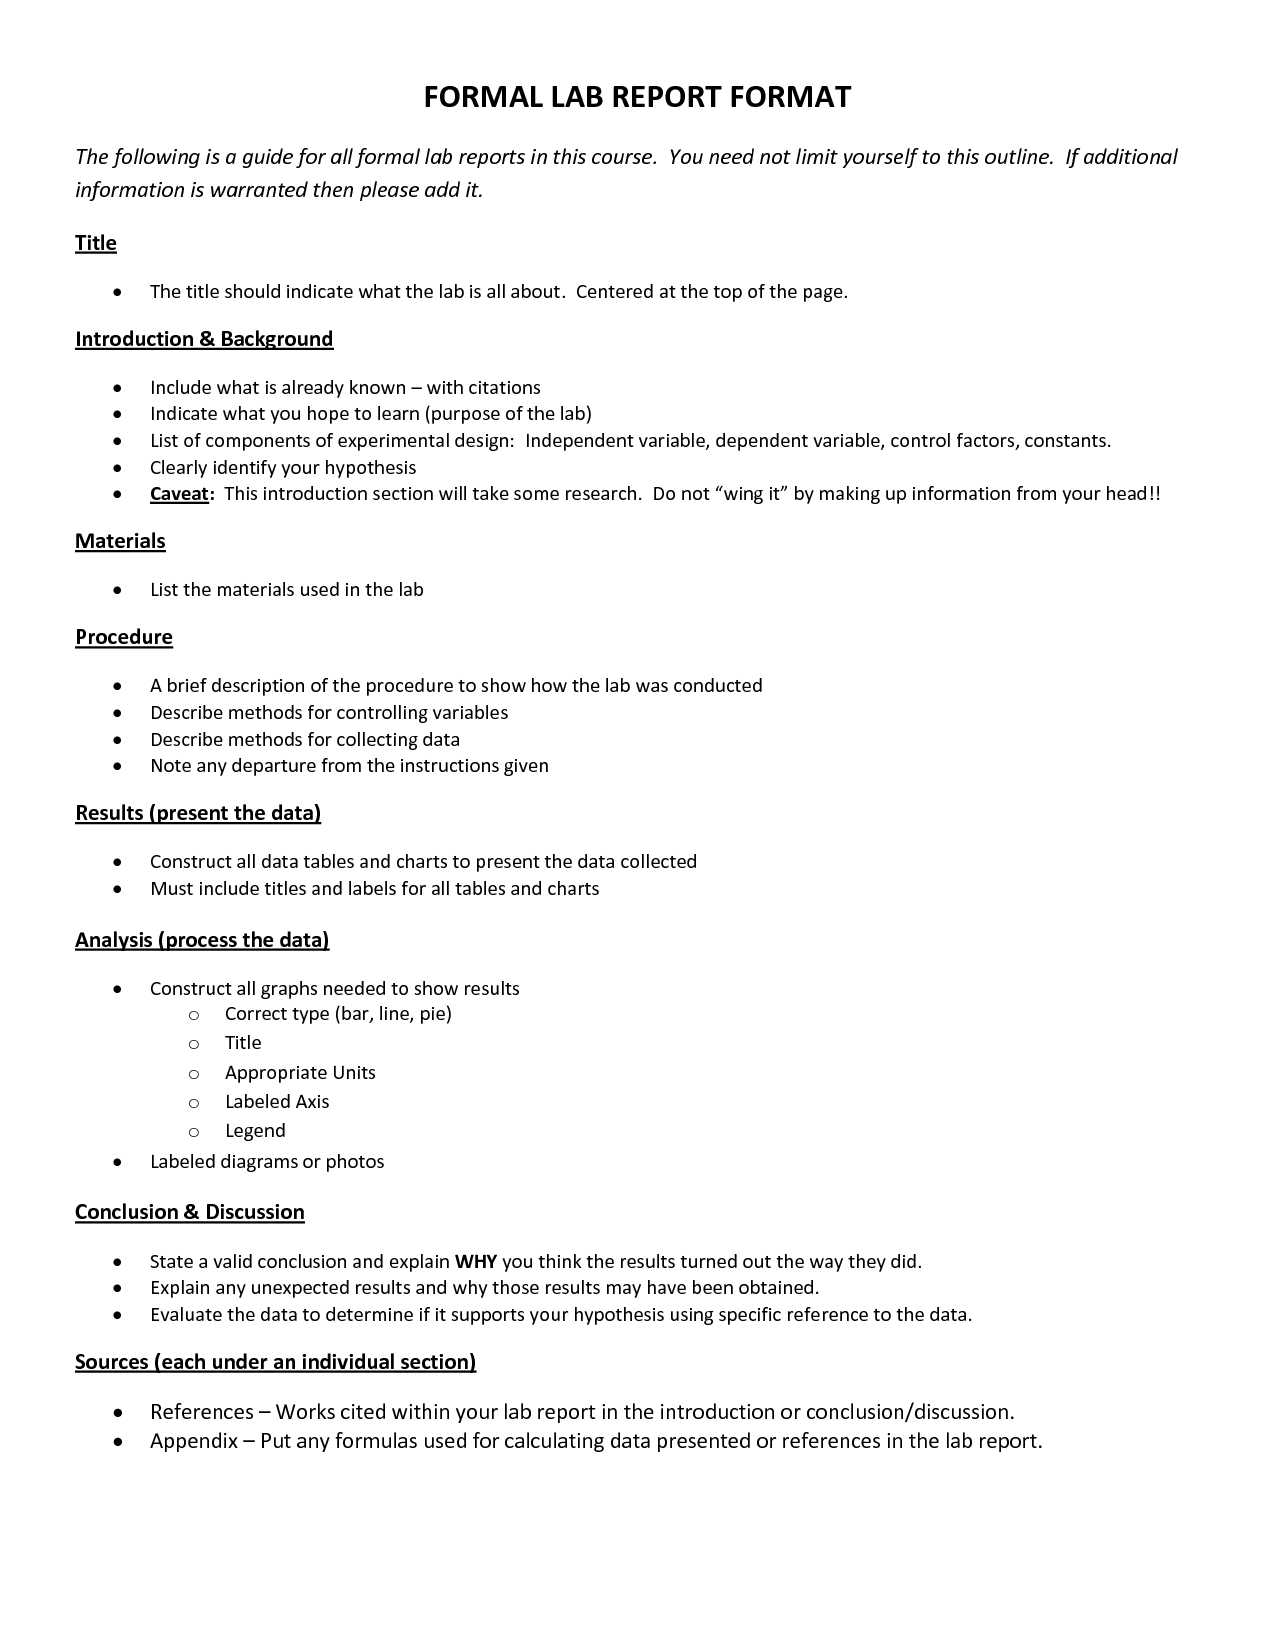 Formal Lab Report Format : Biological Science Picture Throughout Formal Lab Report Template